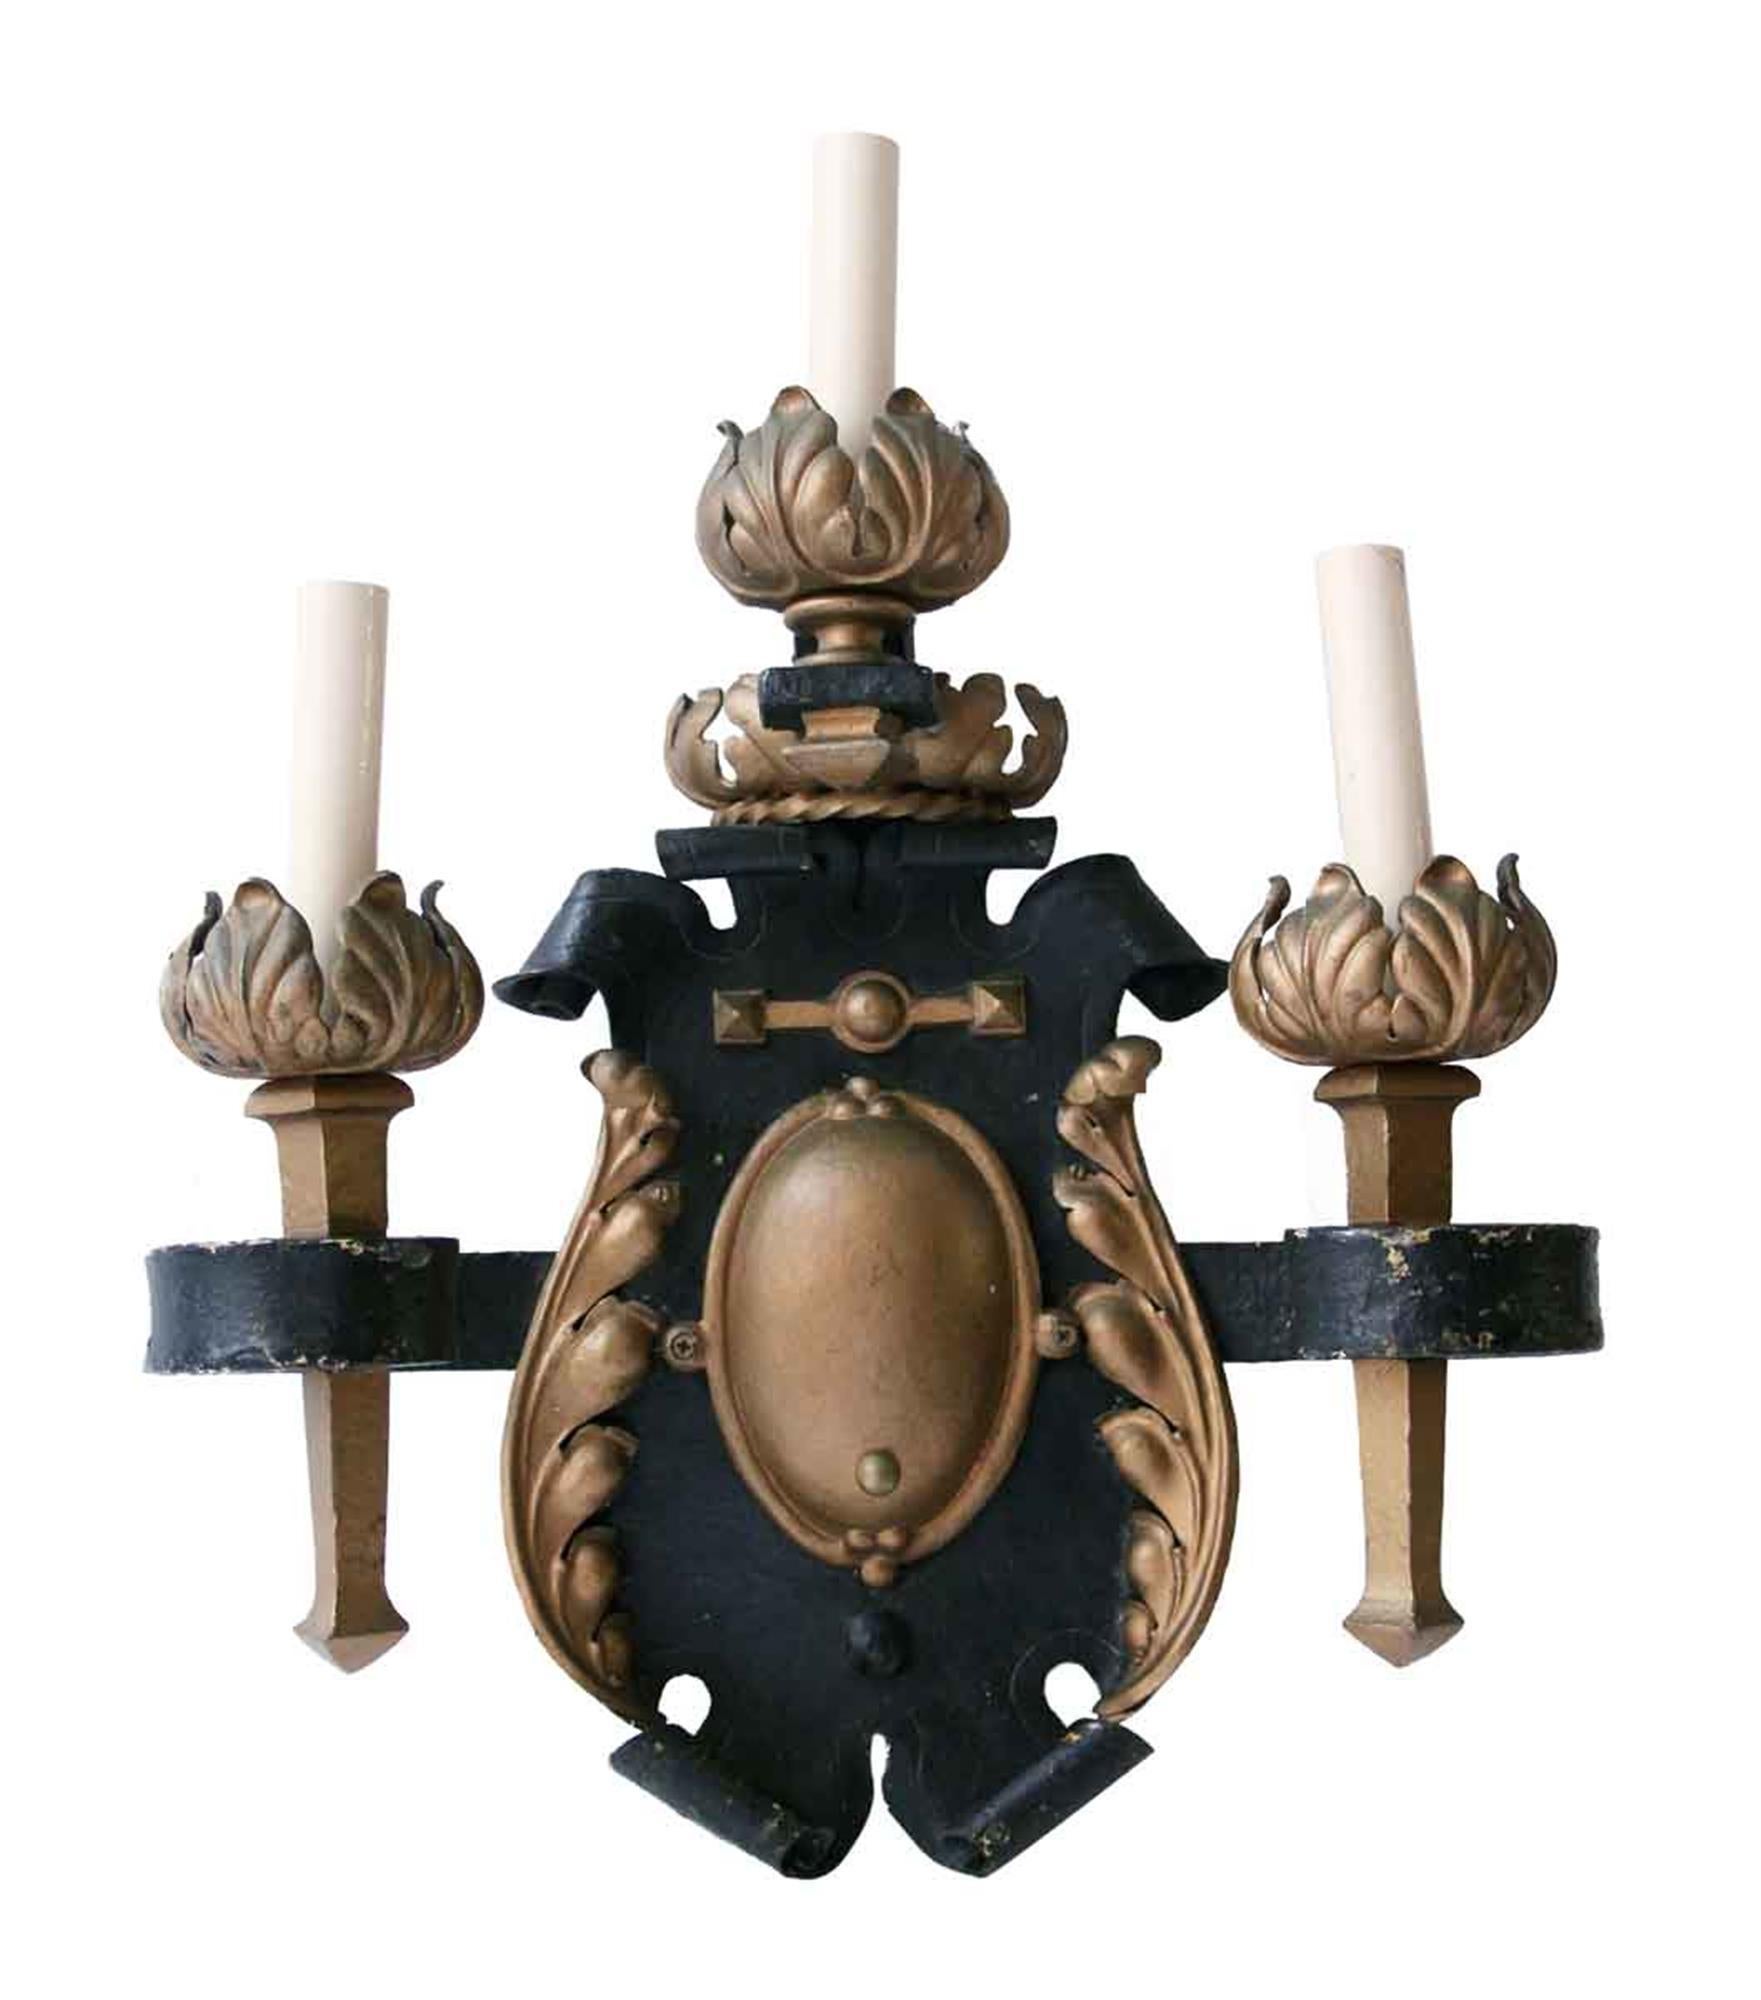 Pair of 1810 electrified French made triple candlestick arm wrought iron and gilt metal sconces. One sconce needs a simple repair in the middle which is included when we rewire these. Please note, this item is located in one of our NYC locations.